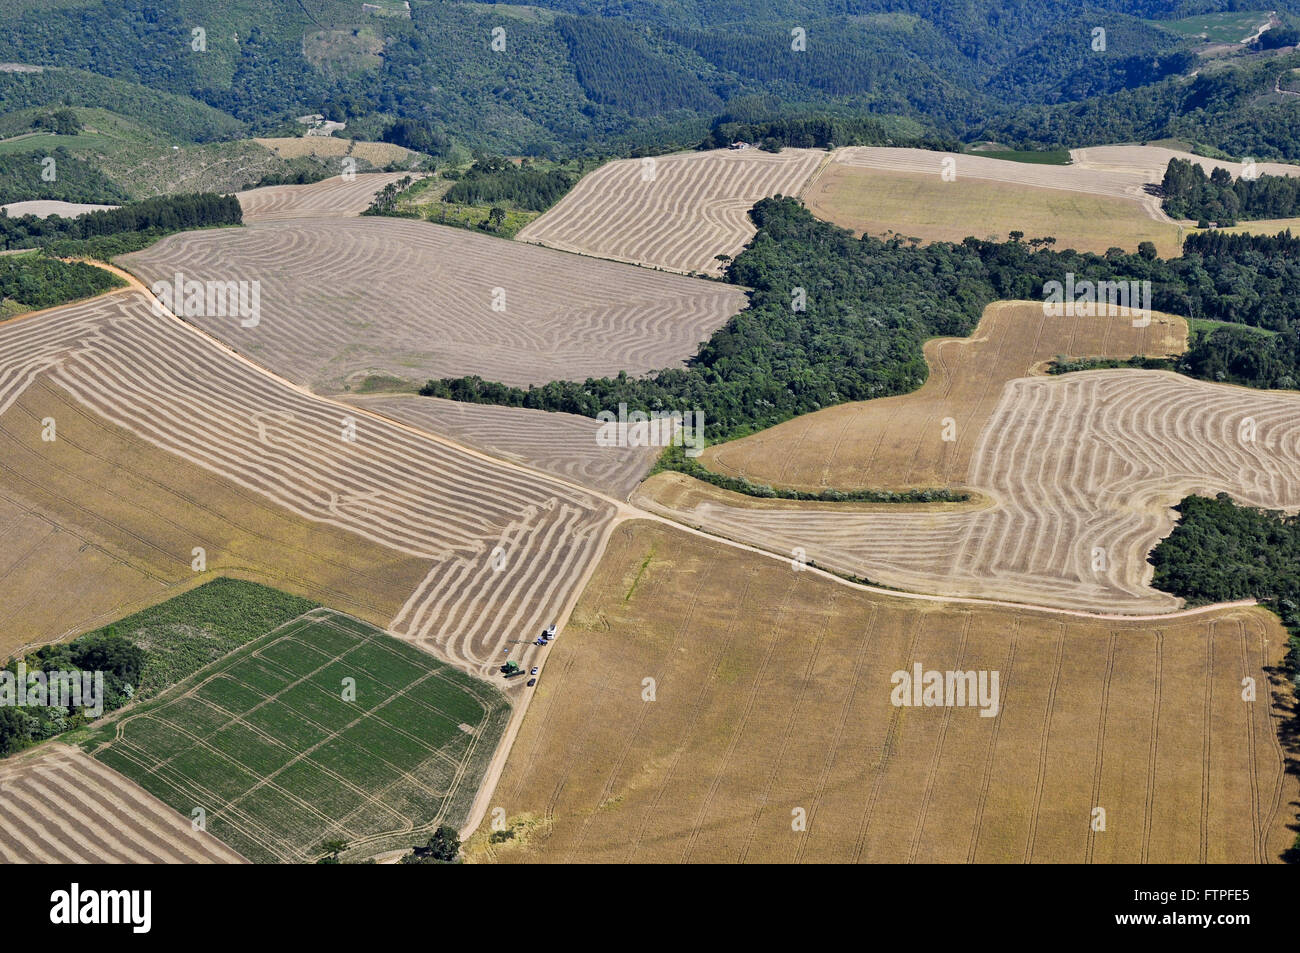 Aerial view of plantation of soybeans harvested in areas with rural property Stock Photo